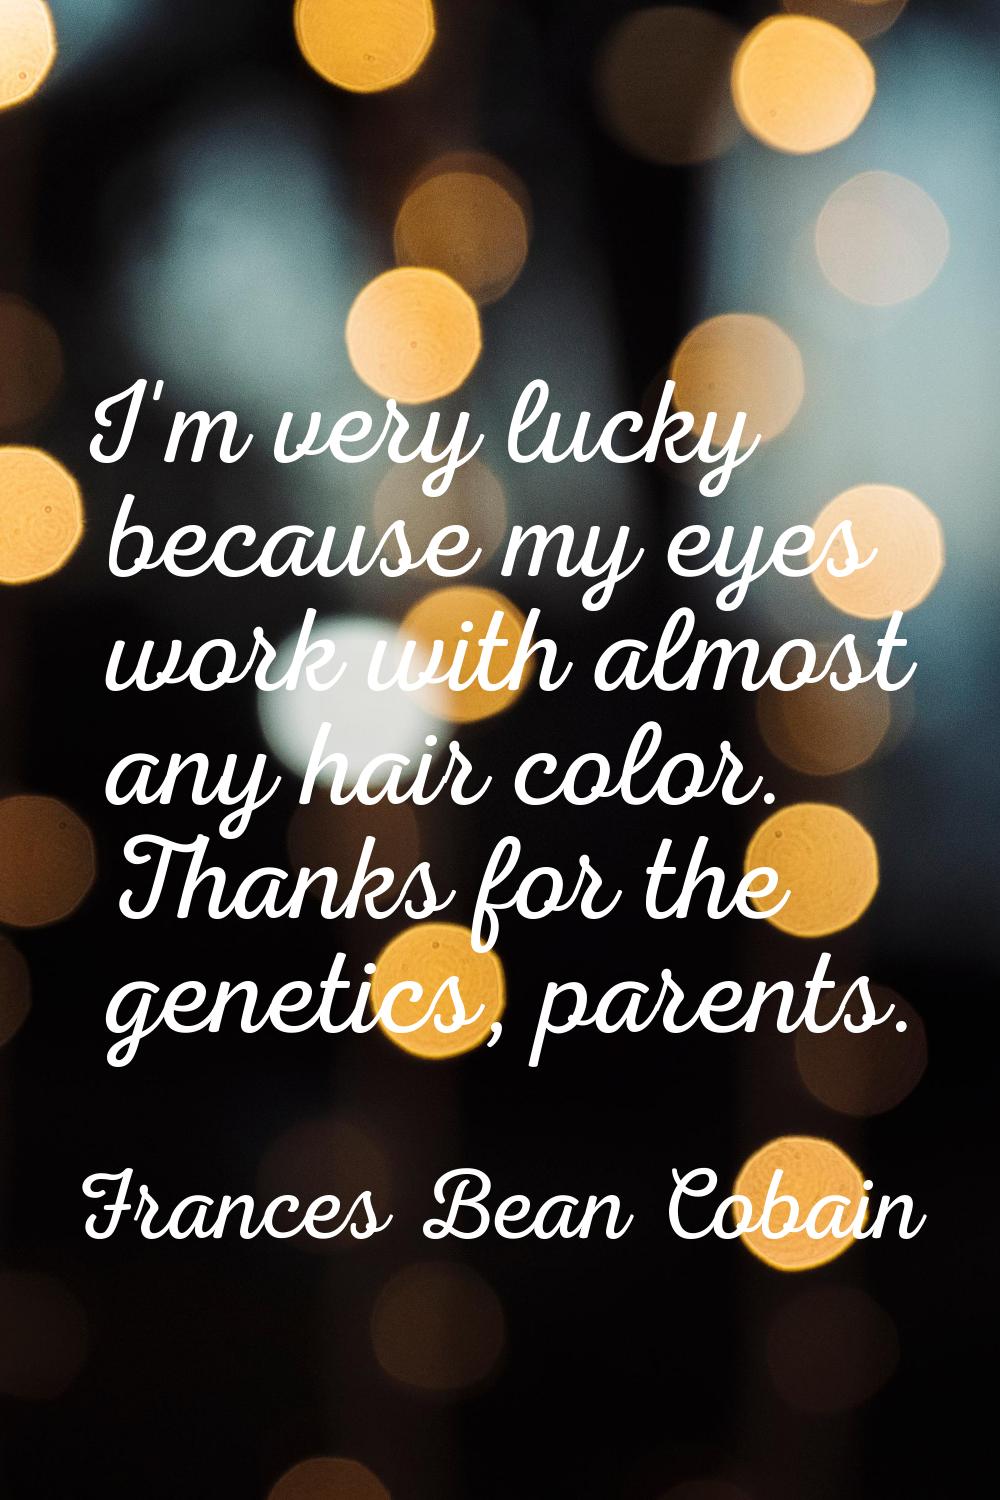 I'm very lucky because my eyes work with almost any hair color. Thanks for the genetics, parents.